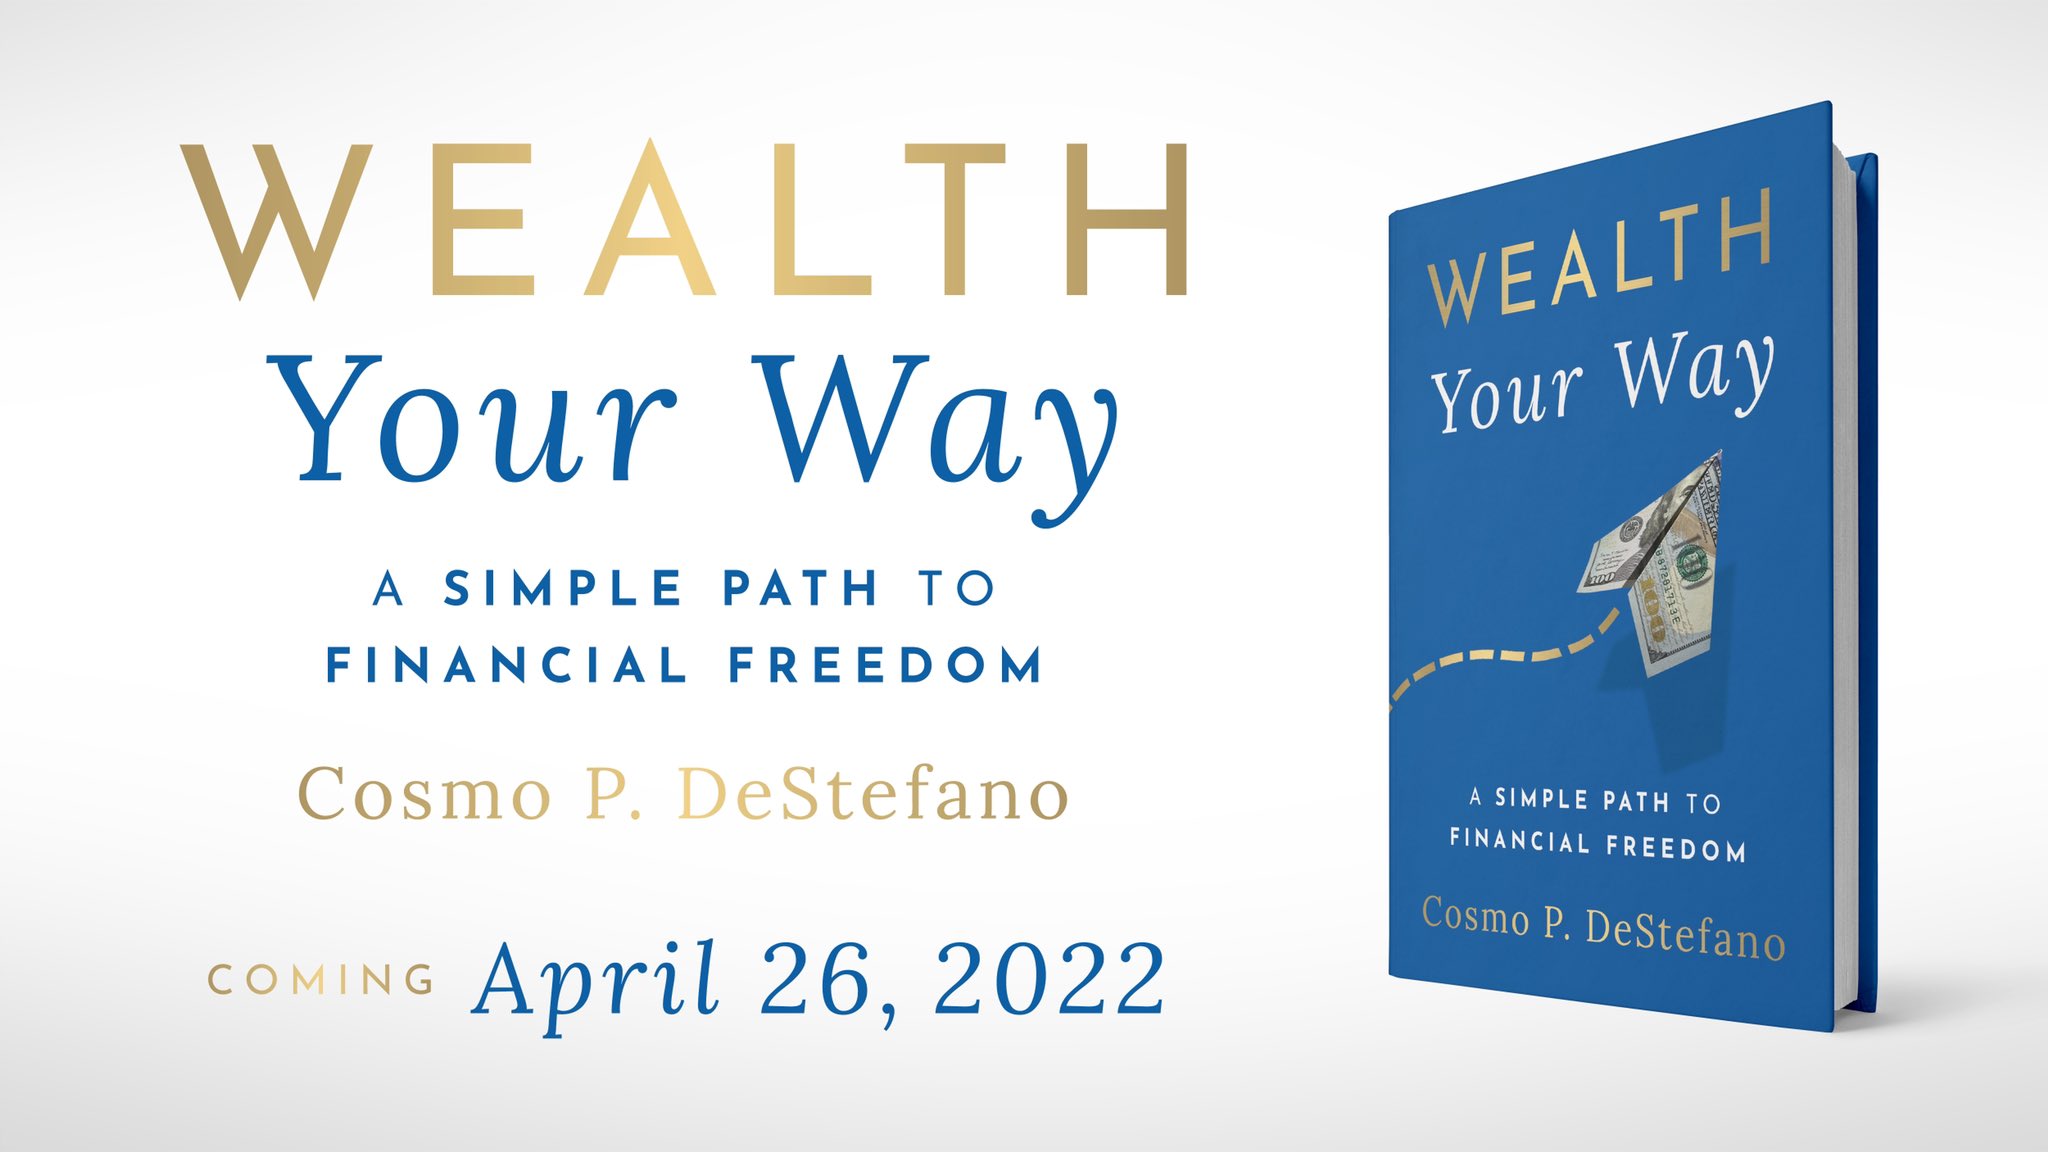 Building Sustainable Wealth: A Review of Cosmo P. DeStefano's "Wealth Your Way"